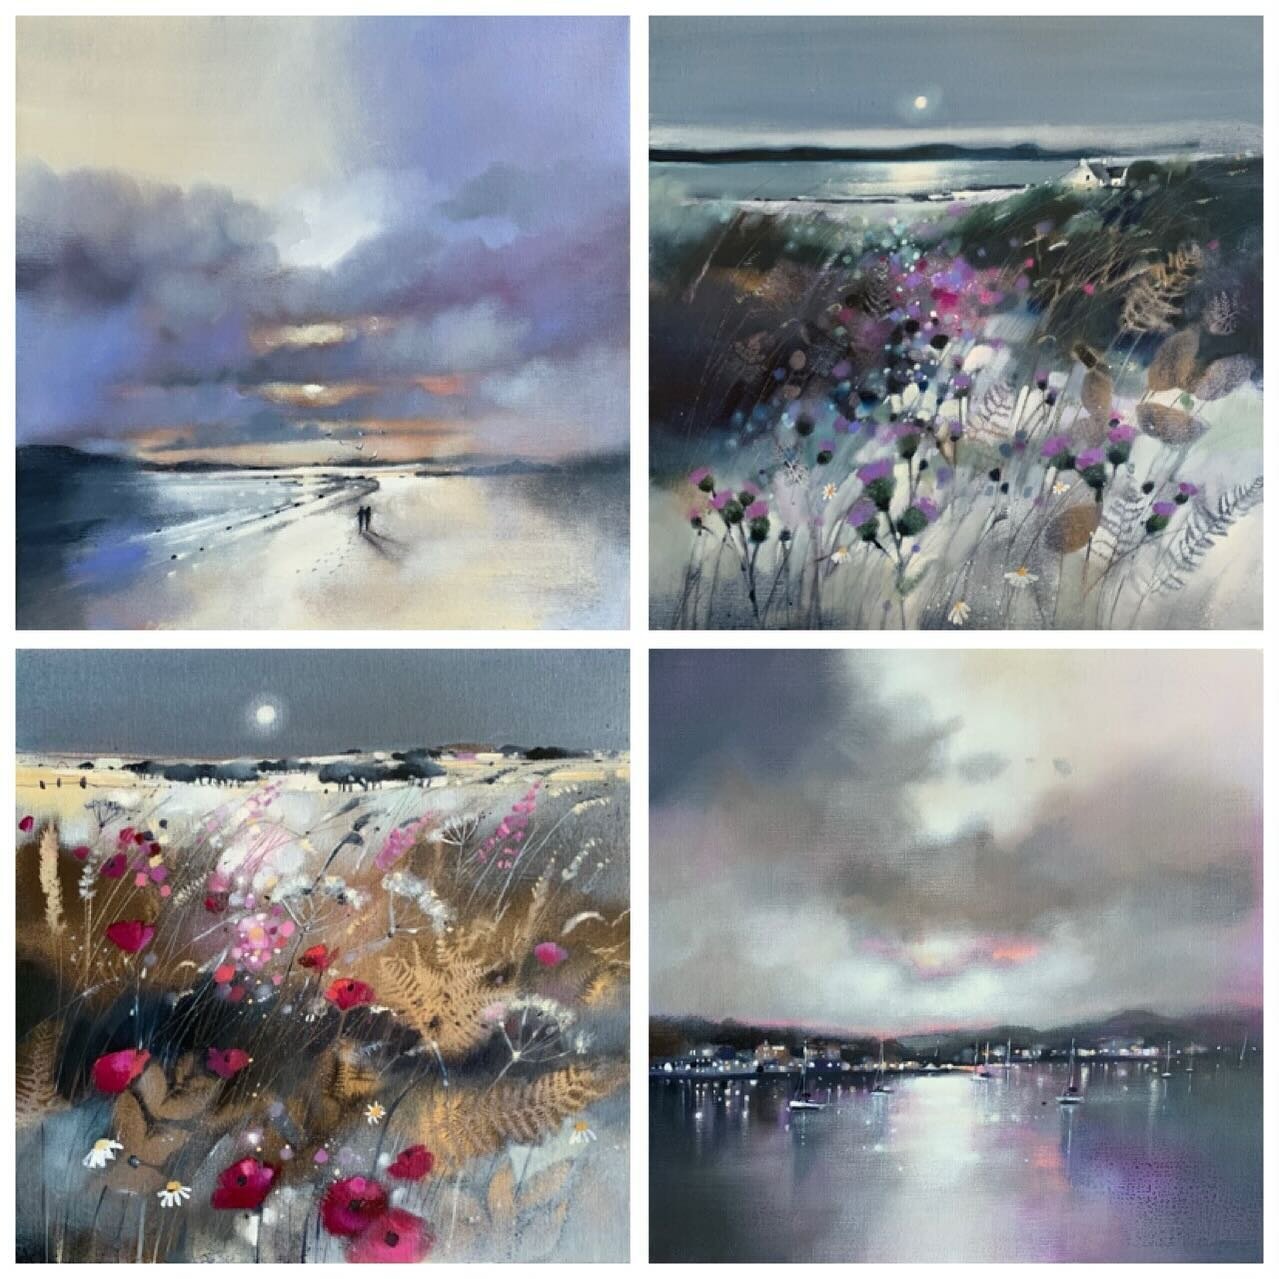 Selection of prints available on the new website.
Framing options available too. 
www.emmasdavisartist.co.uk
.
.
.
#emmasdavisartist #emmasadavisart #scottishart #contemporaryatist #artwork #landscapeartist #wallart #artforinteriors #framing #artgift